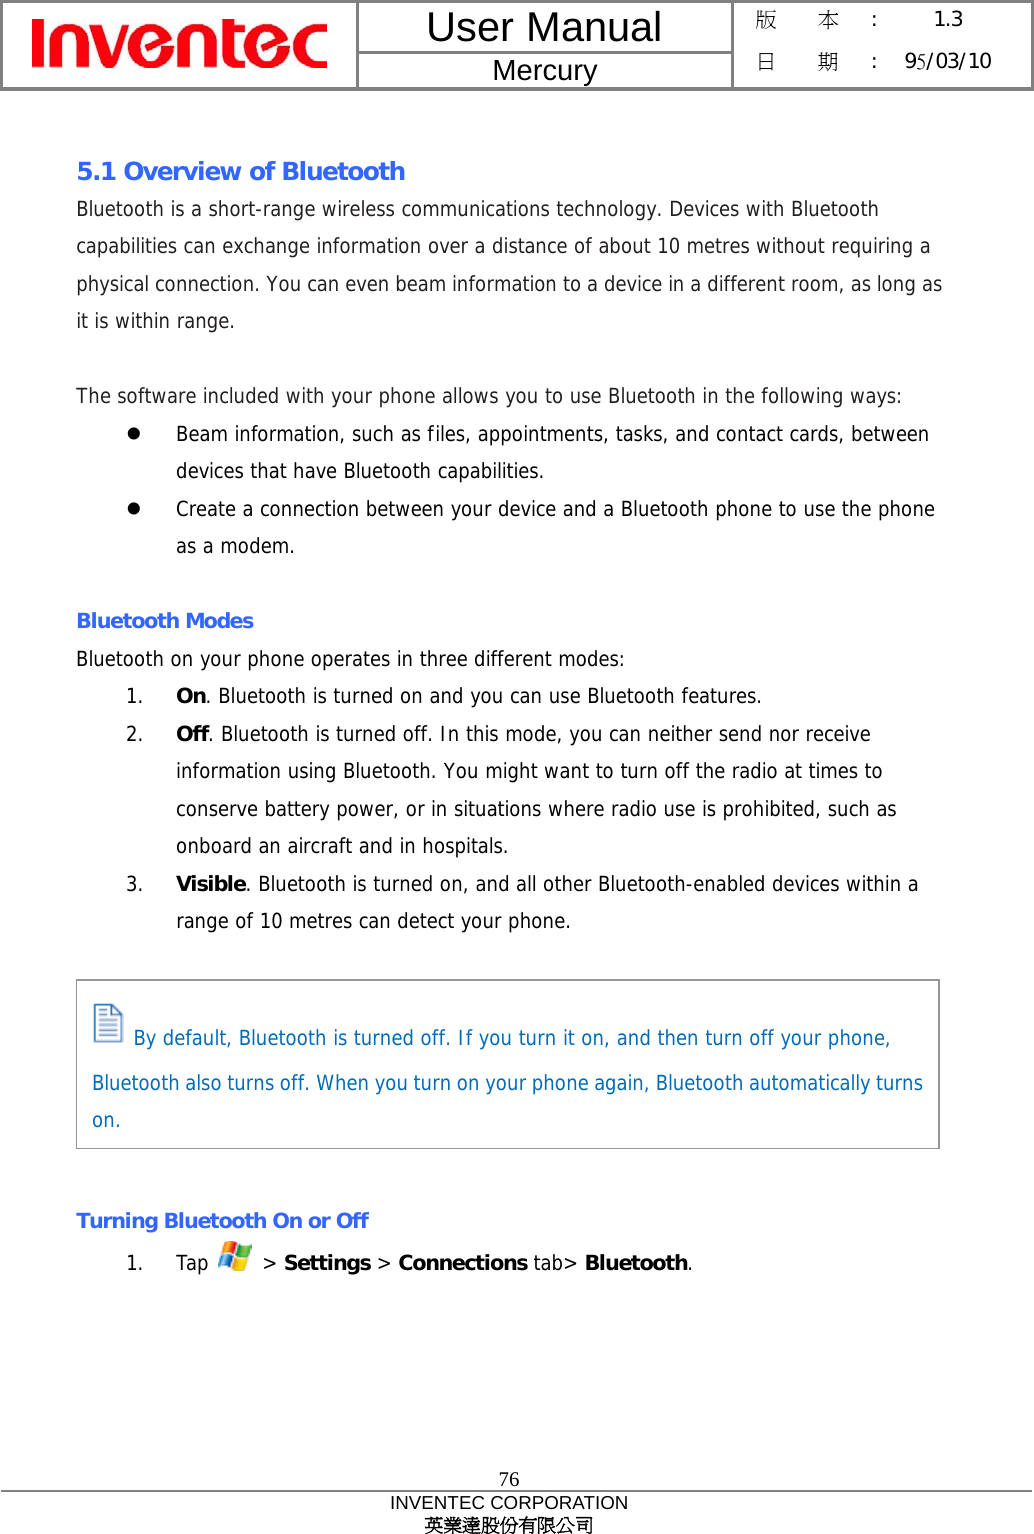 User Manual  Mercury 版    本 :  1.3 日    期 : 95/03/10  76 INVENTEC CORPORATION 英業達股份有限公司   5.1 Overview of Bluetooth Bluetooth is a short-range wireless communications technology. Devices with Bluetooth capabilities can exchange information over a distance of about 10 metres without requiring a physical connection. You can even beam information to a device in a different room, as long as it is within range.  The software included with your phone allows you to use Bluetooth in the following ways:   Beam information, such as files, appointments, tasks, and contact cards, between devices that have Bluetooth capabilities.   Create a connection between your device and a Bluetooth phone to use the phone as a modem.  Bluetooth Modes Bluetooth on your phone operates in three different modes: 1.  On. Bluetooth is turned on and you can use Bluetooth features. 2.  Off. Bluetooth is turned off. In this mode, you can neither send nor receive information using Bluetooth. You might want to turn off the radio at times to conserve battery power, or in situations where radio use is prohibited, such as onboard an aircraft and in hospitals. 3.  Visible. Bluetooth is turned on, and all other Bluetooth-enabled devices within a range of 10 metres can detect your phone.        Turning Bluetooth On or Off 1. Tap   &gt; Settings &gt; Connections tab&gt; Bluetooth.  By default, Bluetooth is turned off. If you turn it on, and then turn off your phone, Bluetooth also turns off. When you turn on your phone again, Bluetooth automatically turnson. 